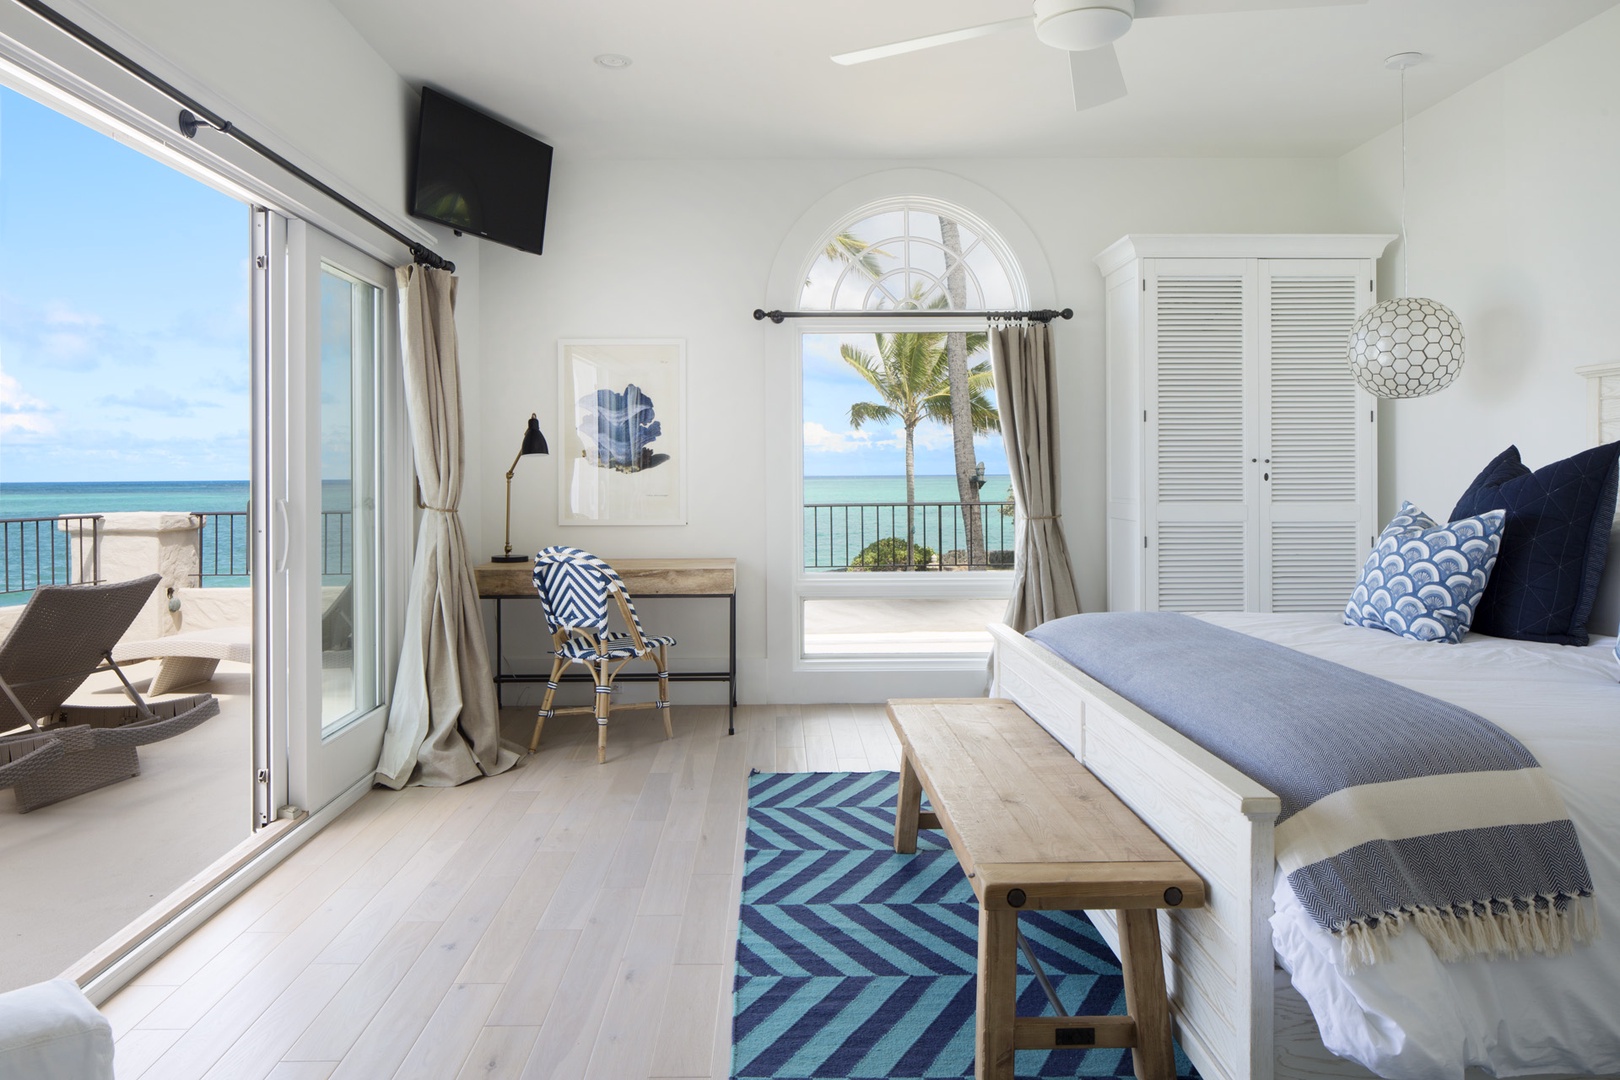 Kailua Vacation Rentals, The Villa at Wailea Point* - Guest bedroom with a king bed, access to lanai, TV and panoramic views.